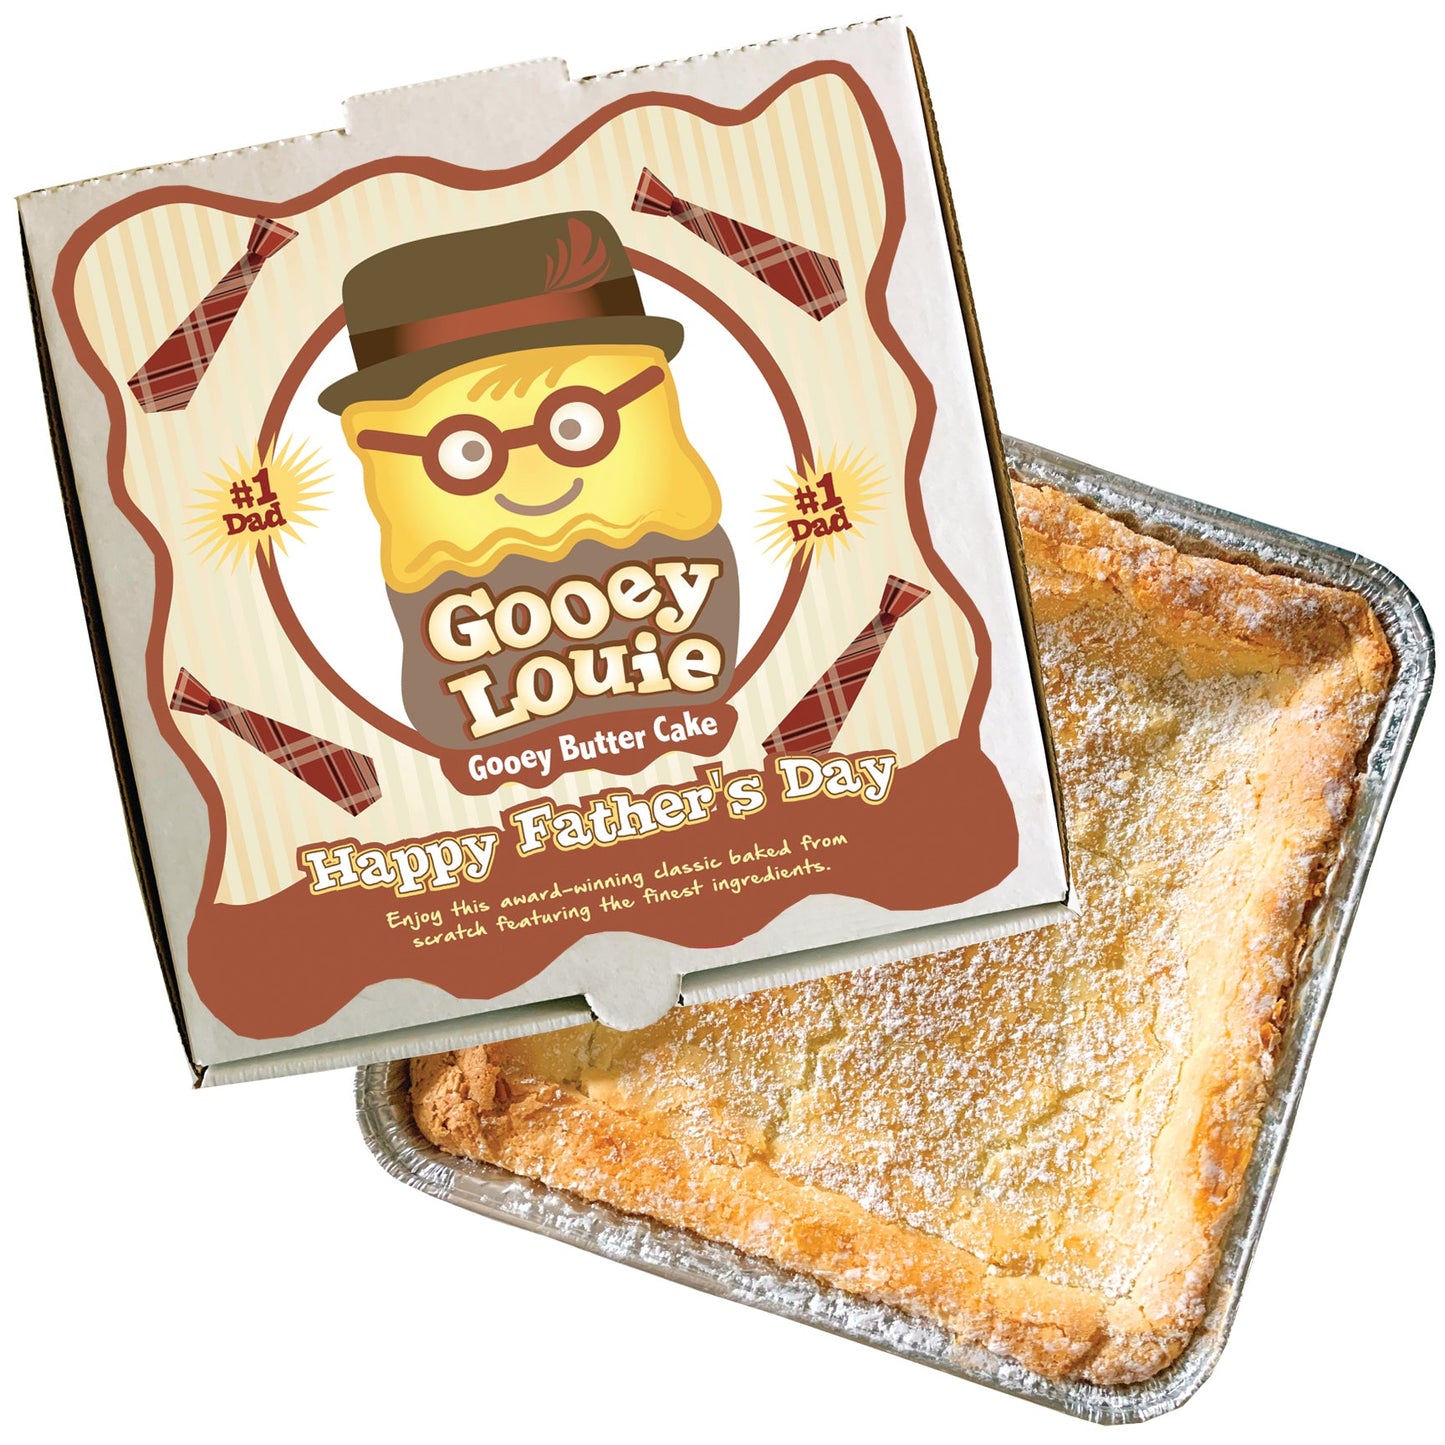 FATHER'S DAY (Old School) Gooey Louie Box– Original Gooey Butter Cake LOCAL PICKUP